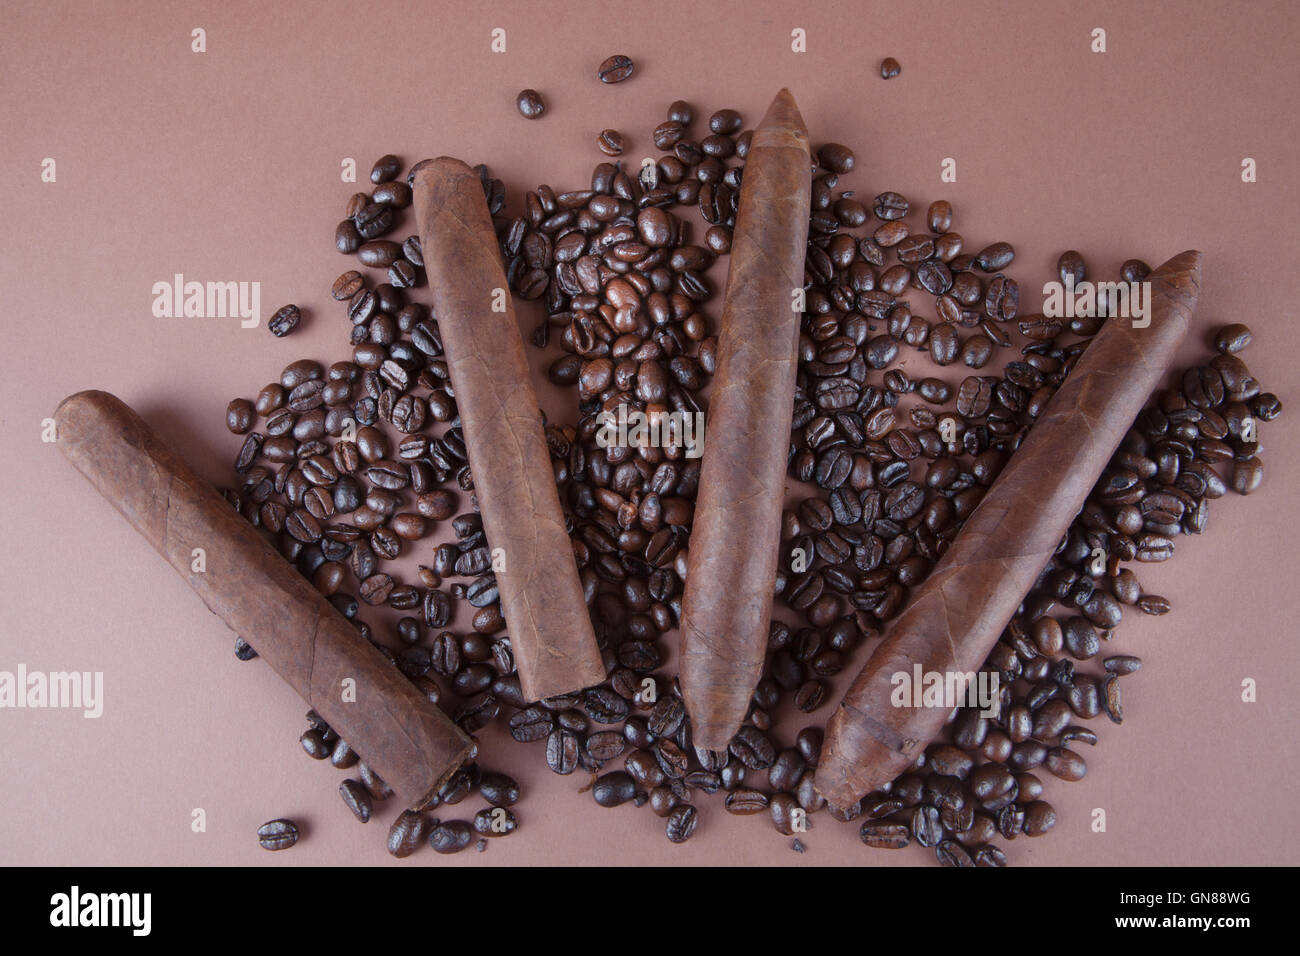 Cigars and Cuban Coffee beans on brown background Stock Photo